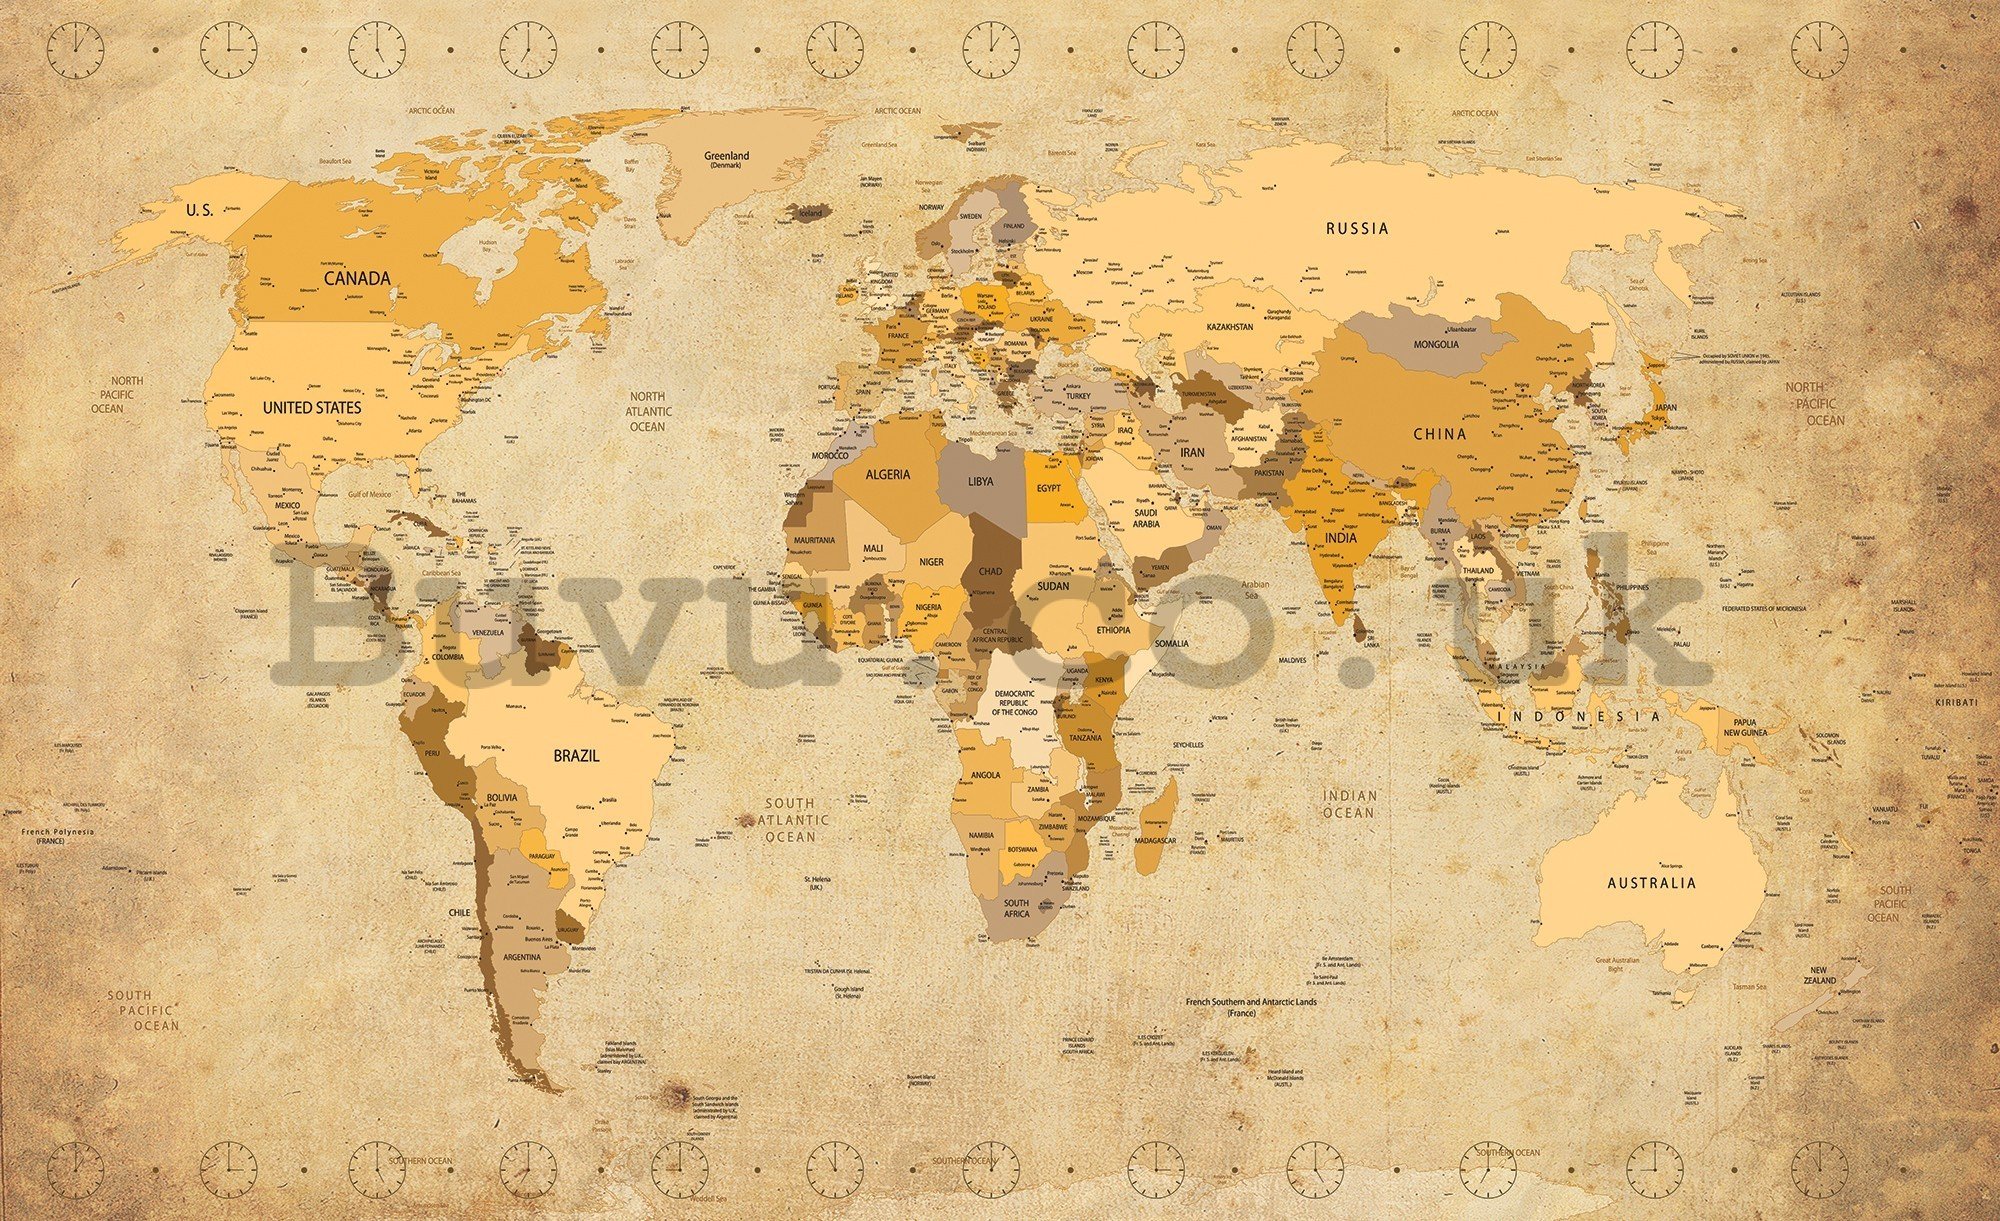 Wall mural vlies: Map of the world (Vintage) - 416x254 cm